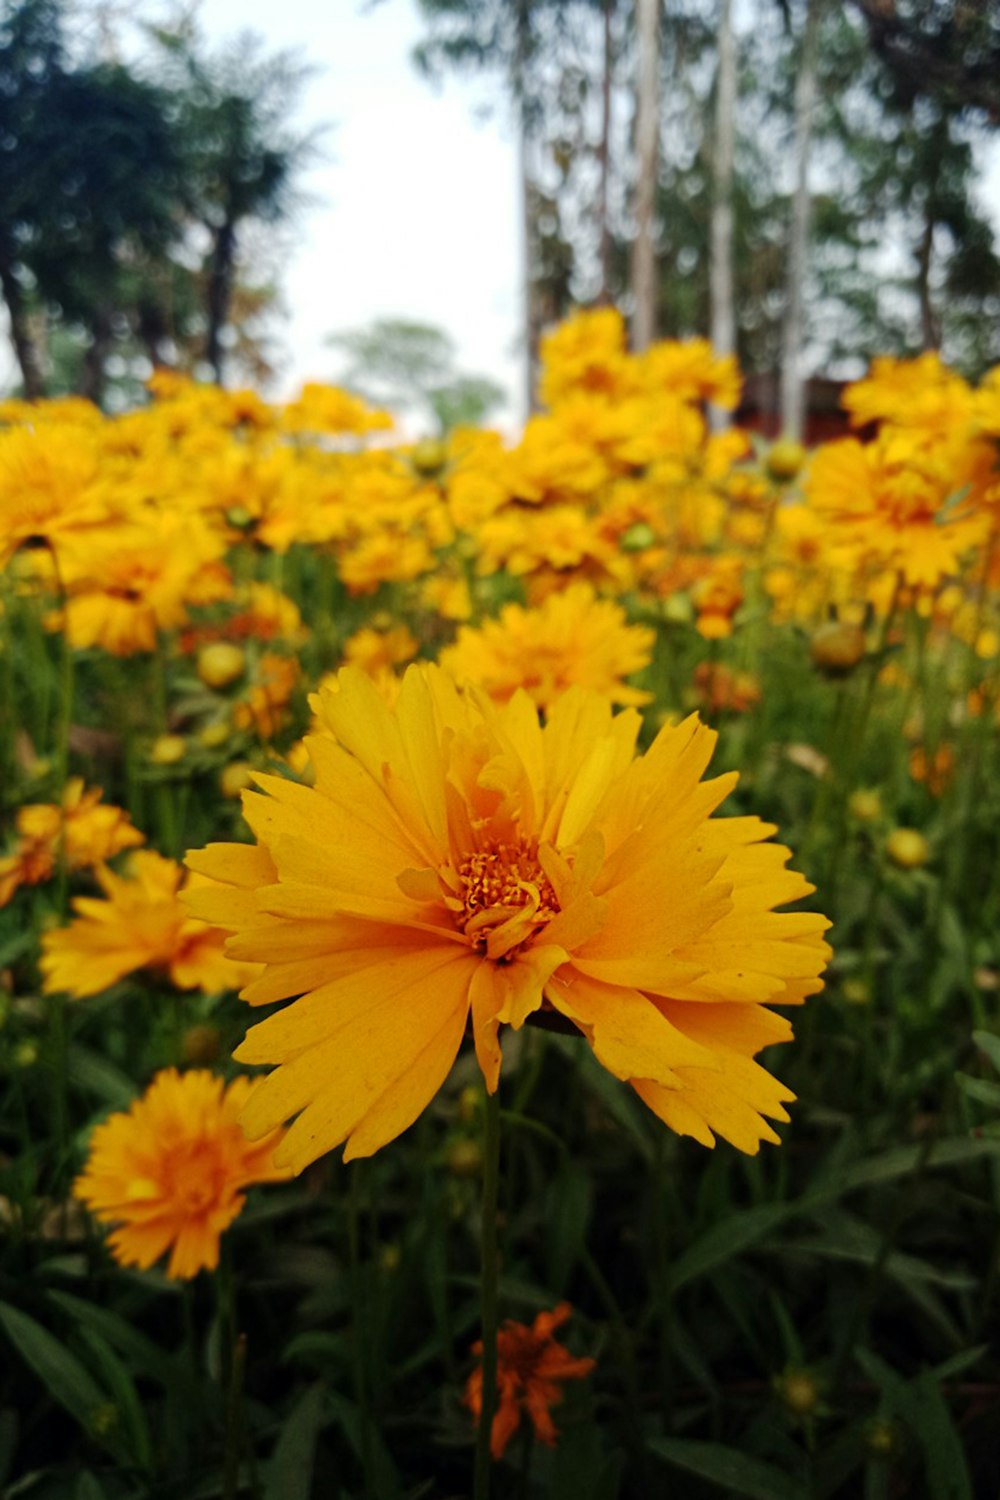 a yellow flower surrounded by yellow flowers